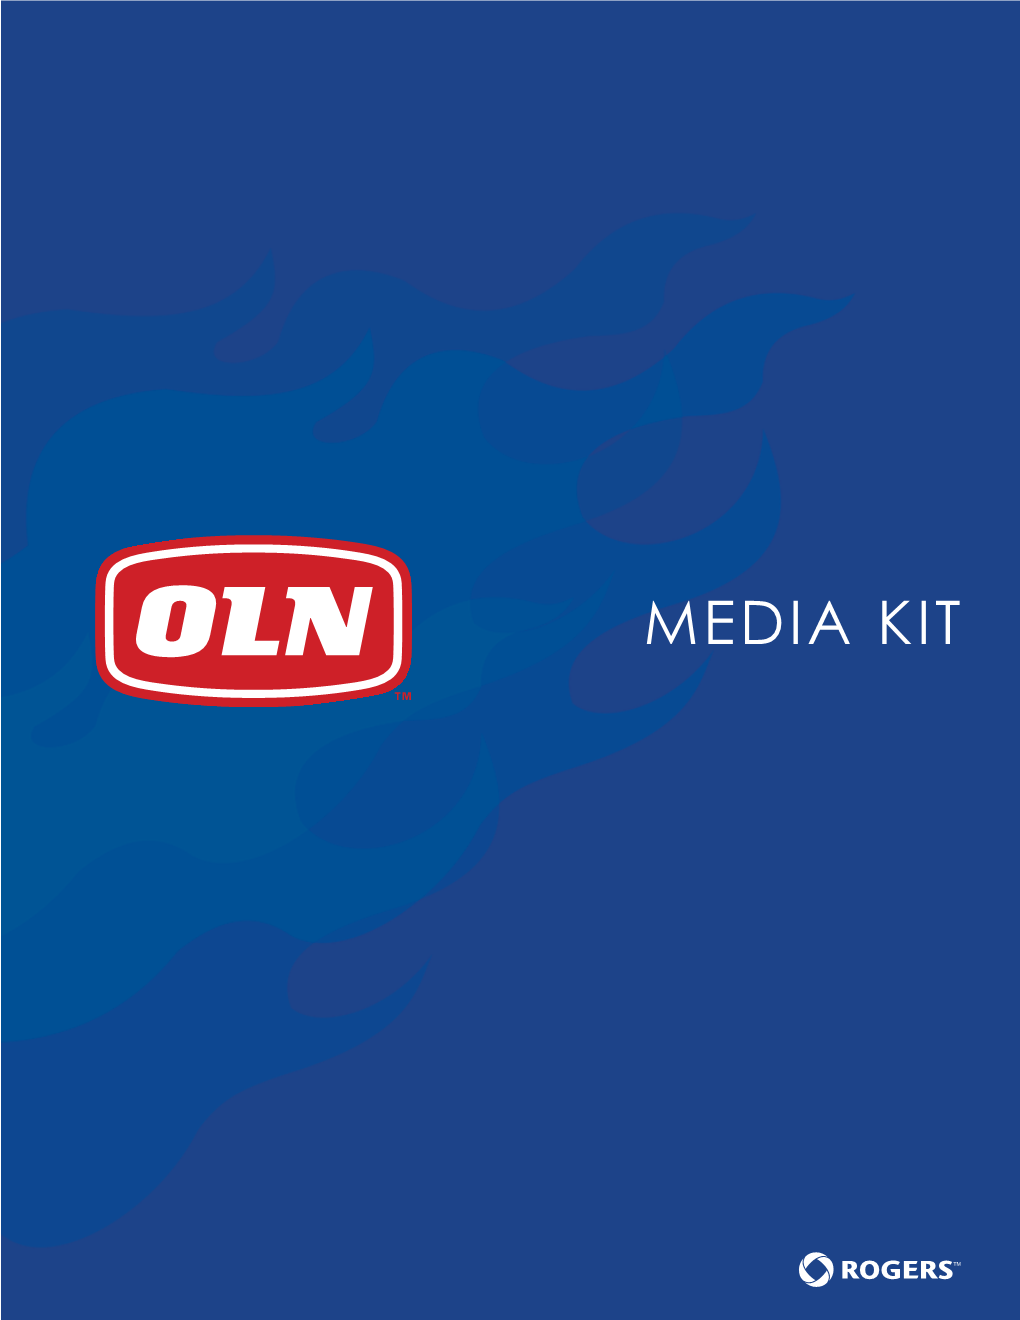 MEDIA KIT OLN Is Specialty Television Station in Canada Offering Viewers a One-Stop Destination for Adrenaline Pumping Action and Adventure Entertainment